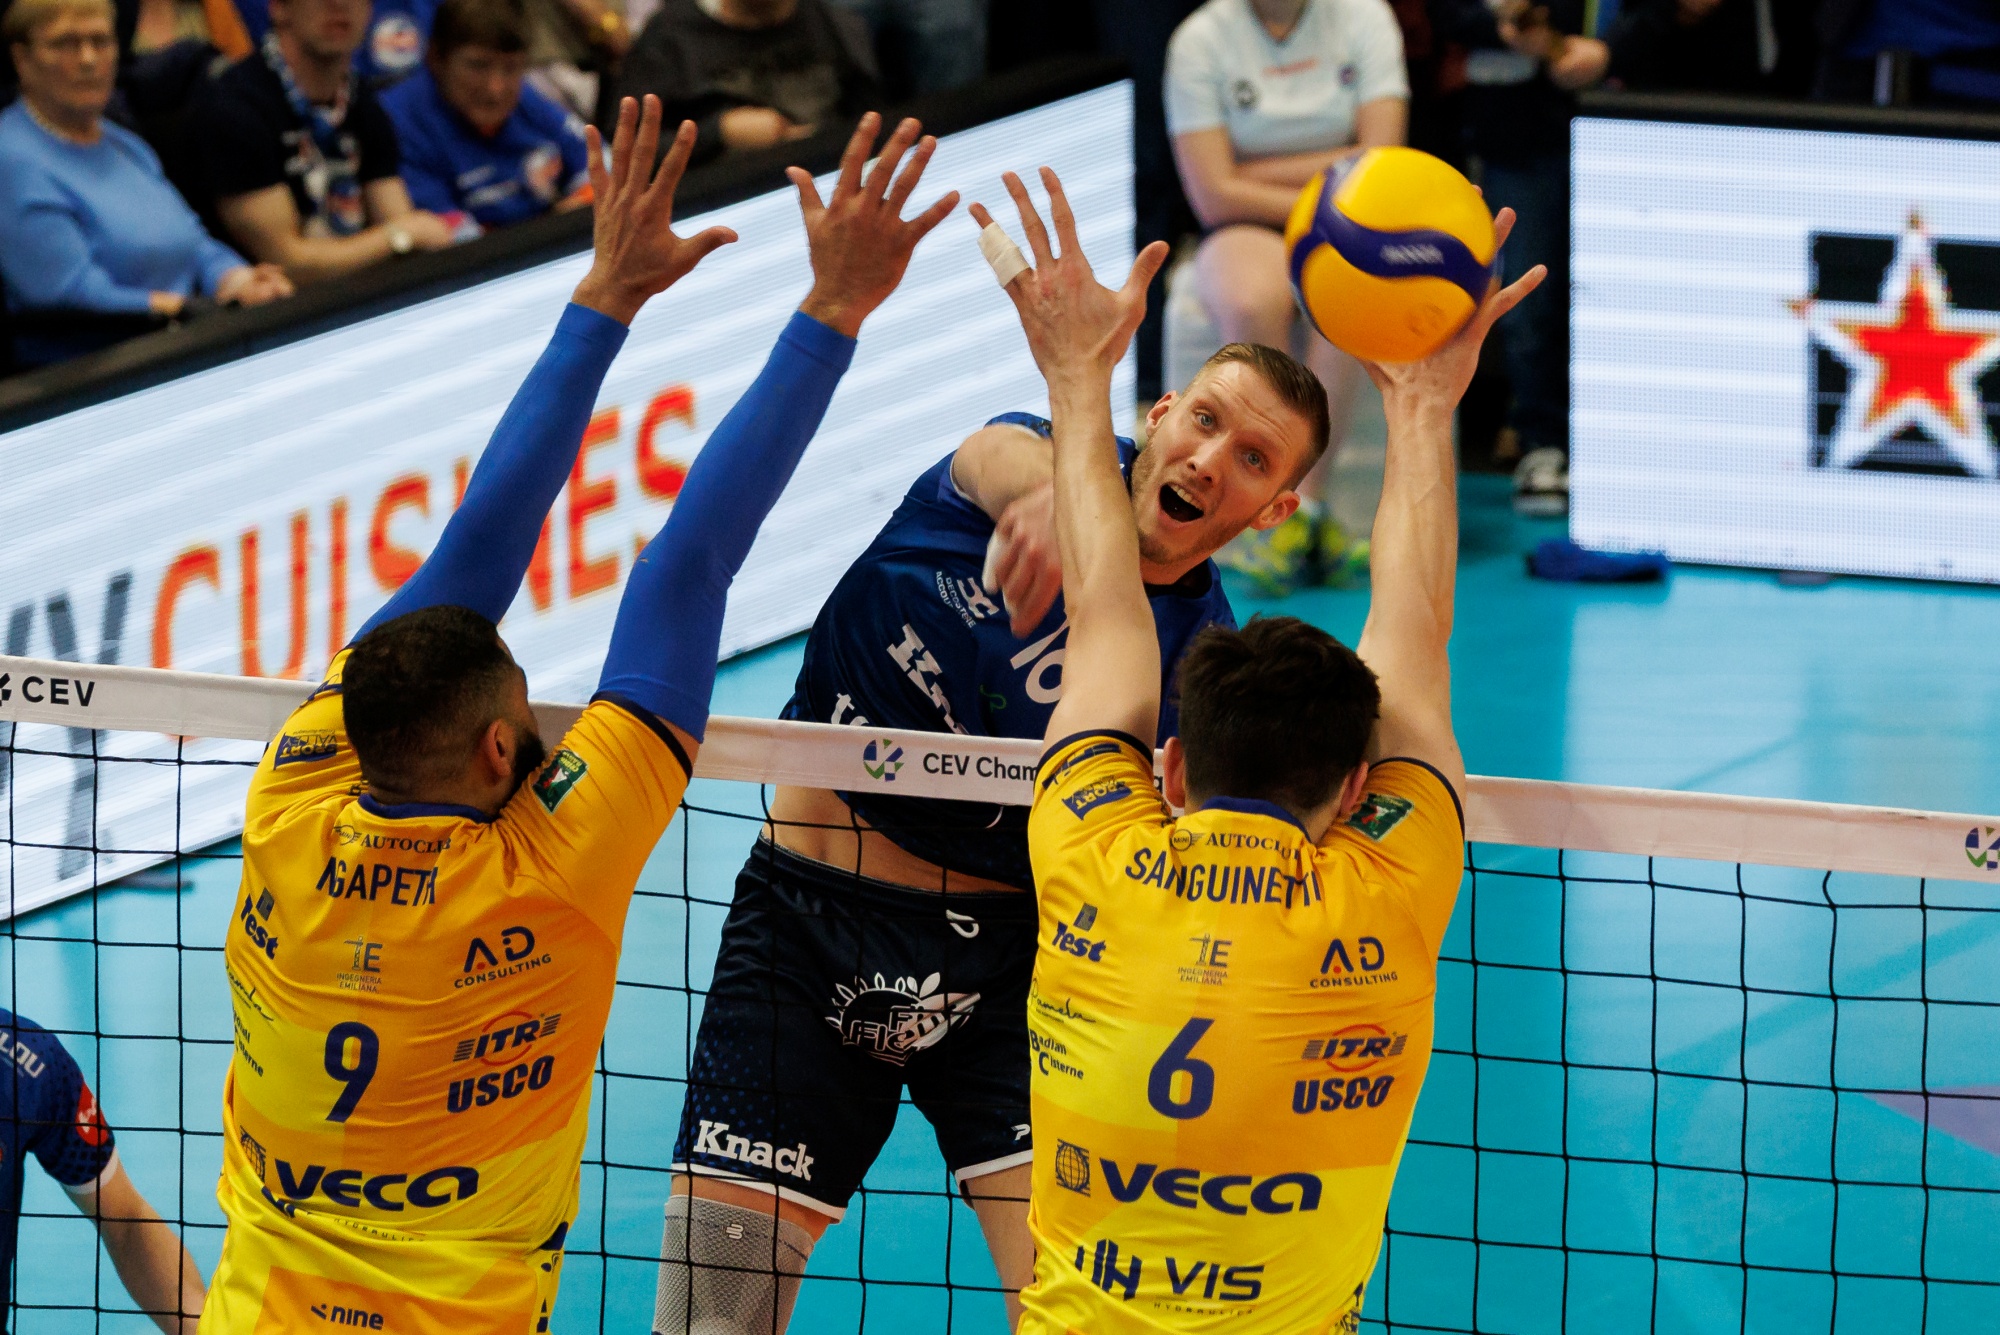 Modena's Earvin Ngapeth, Roeselare's Pablo Sergio Koukartsev and Modena's Giovanni Sanguinetti fight for the ball during a volleyball match between Knack Roeselare and Modena, second leg of the final of the men's CEV Cup, Wednesday 05 April 2023 in Roeselare. BELGA PHOTO KURT DESPLENTER